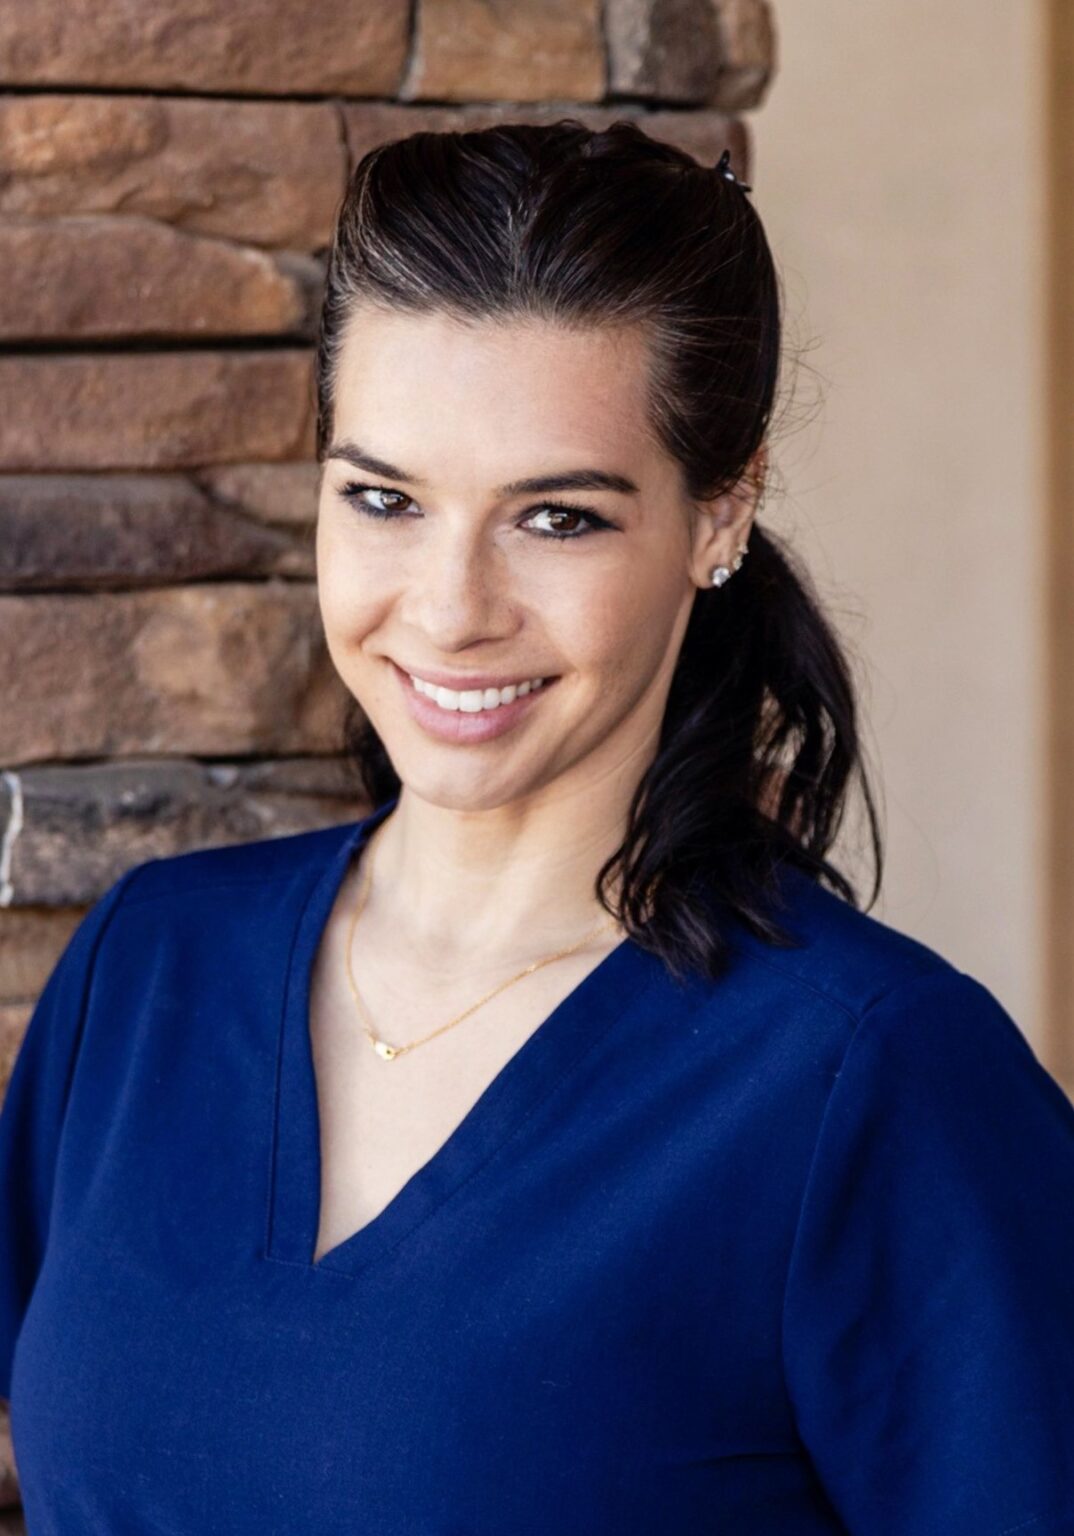 A woman in blue shirt smiling for the camera.